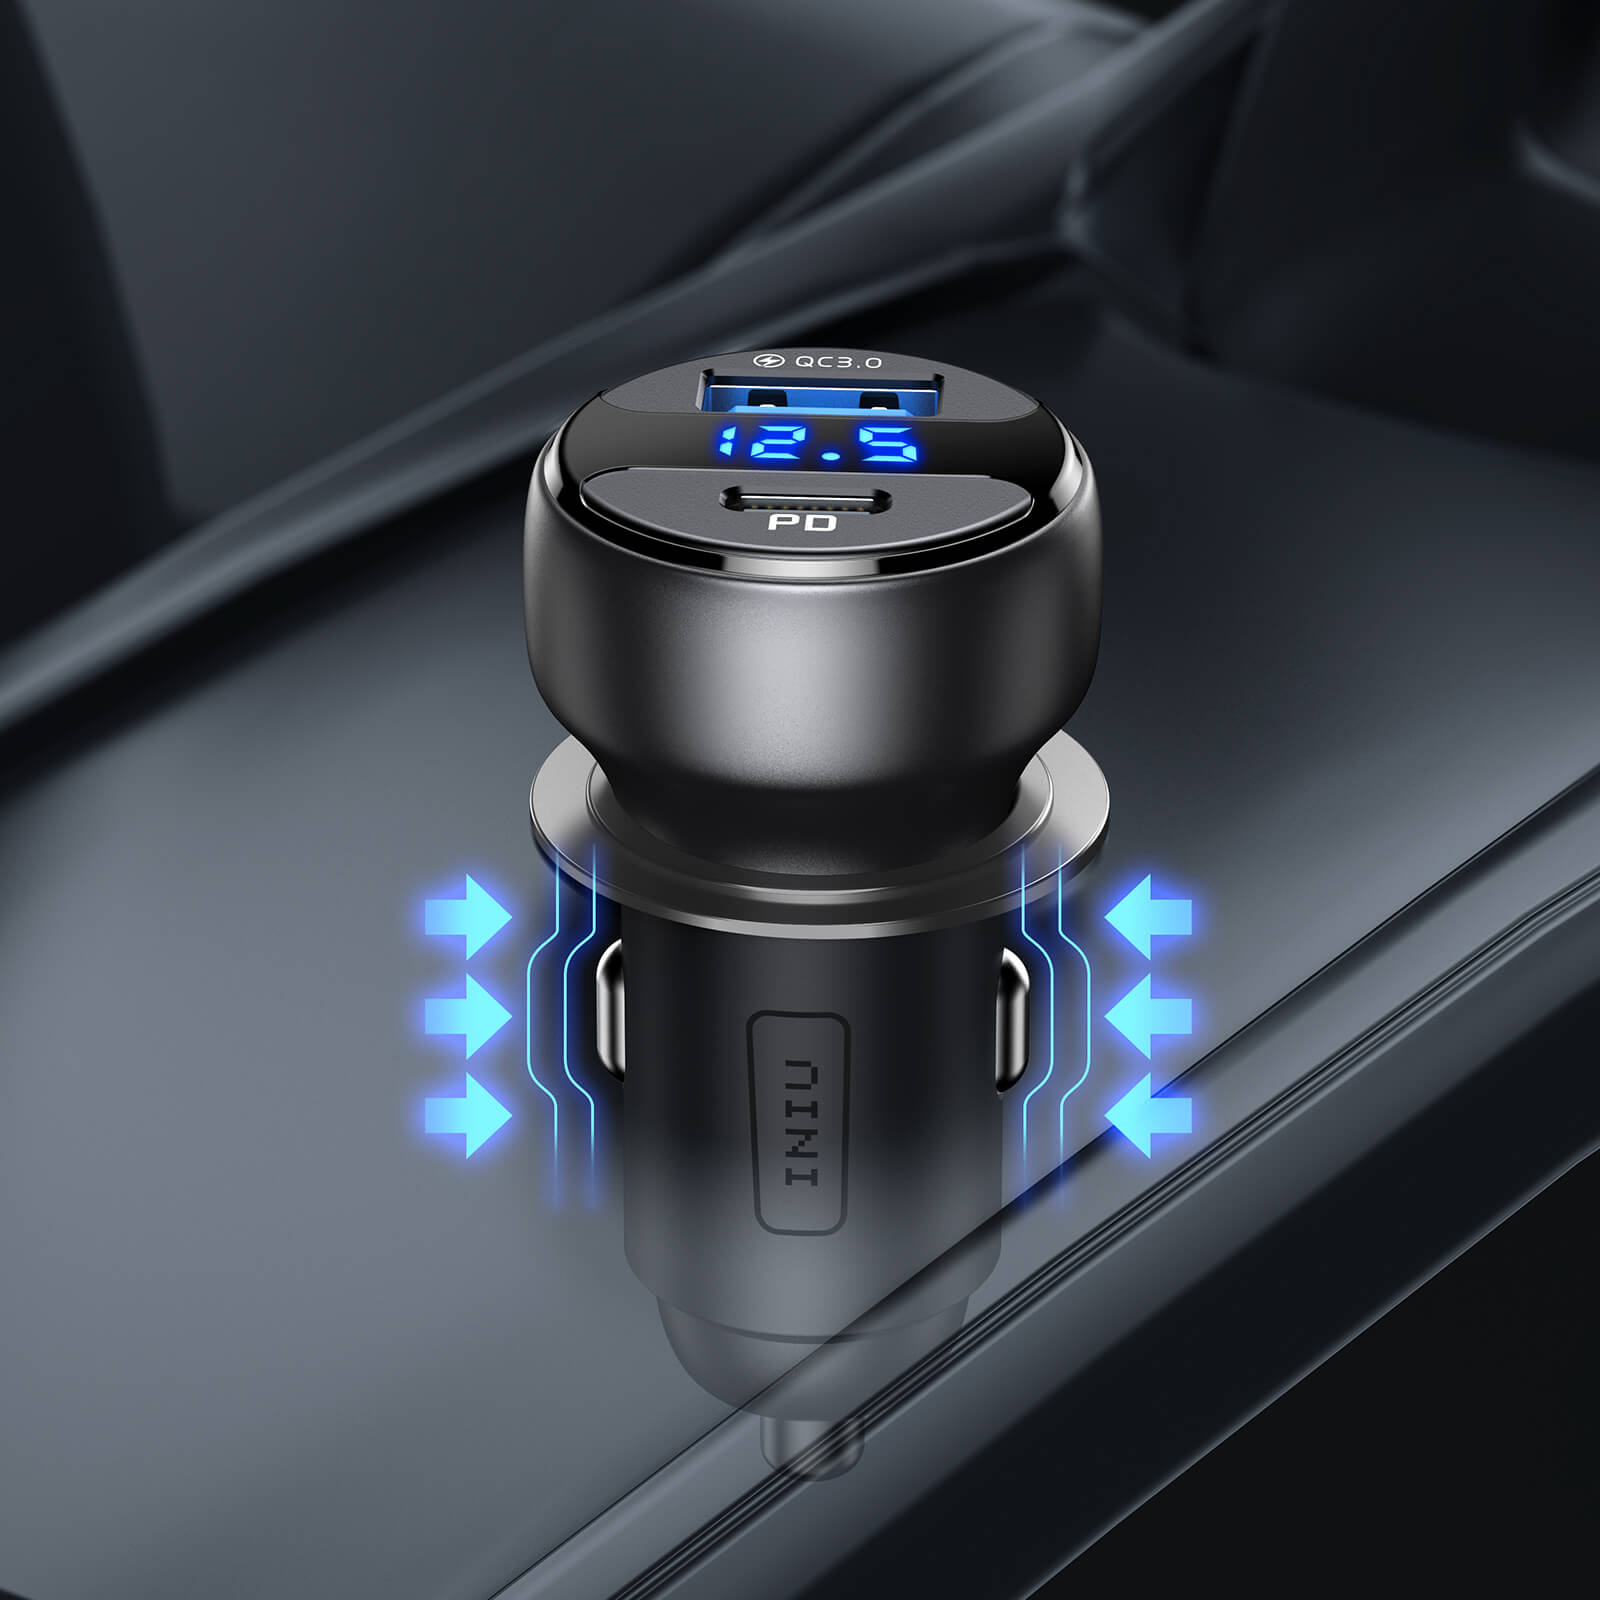 INIU 66W Car Usb-c Charger CI-711 With Voltage Display